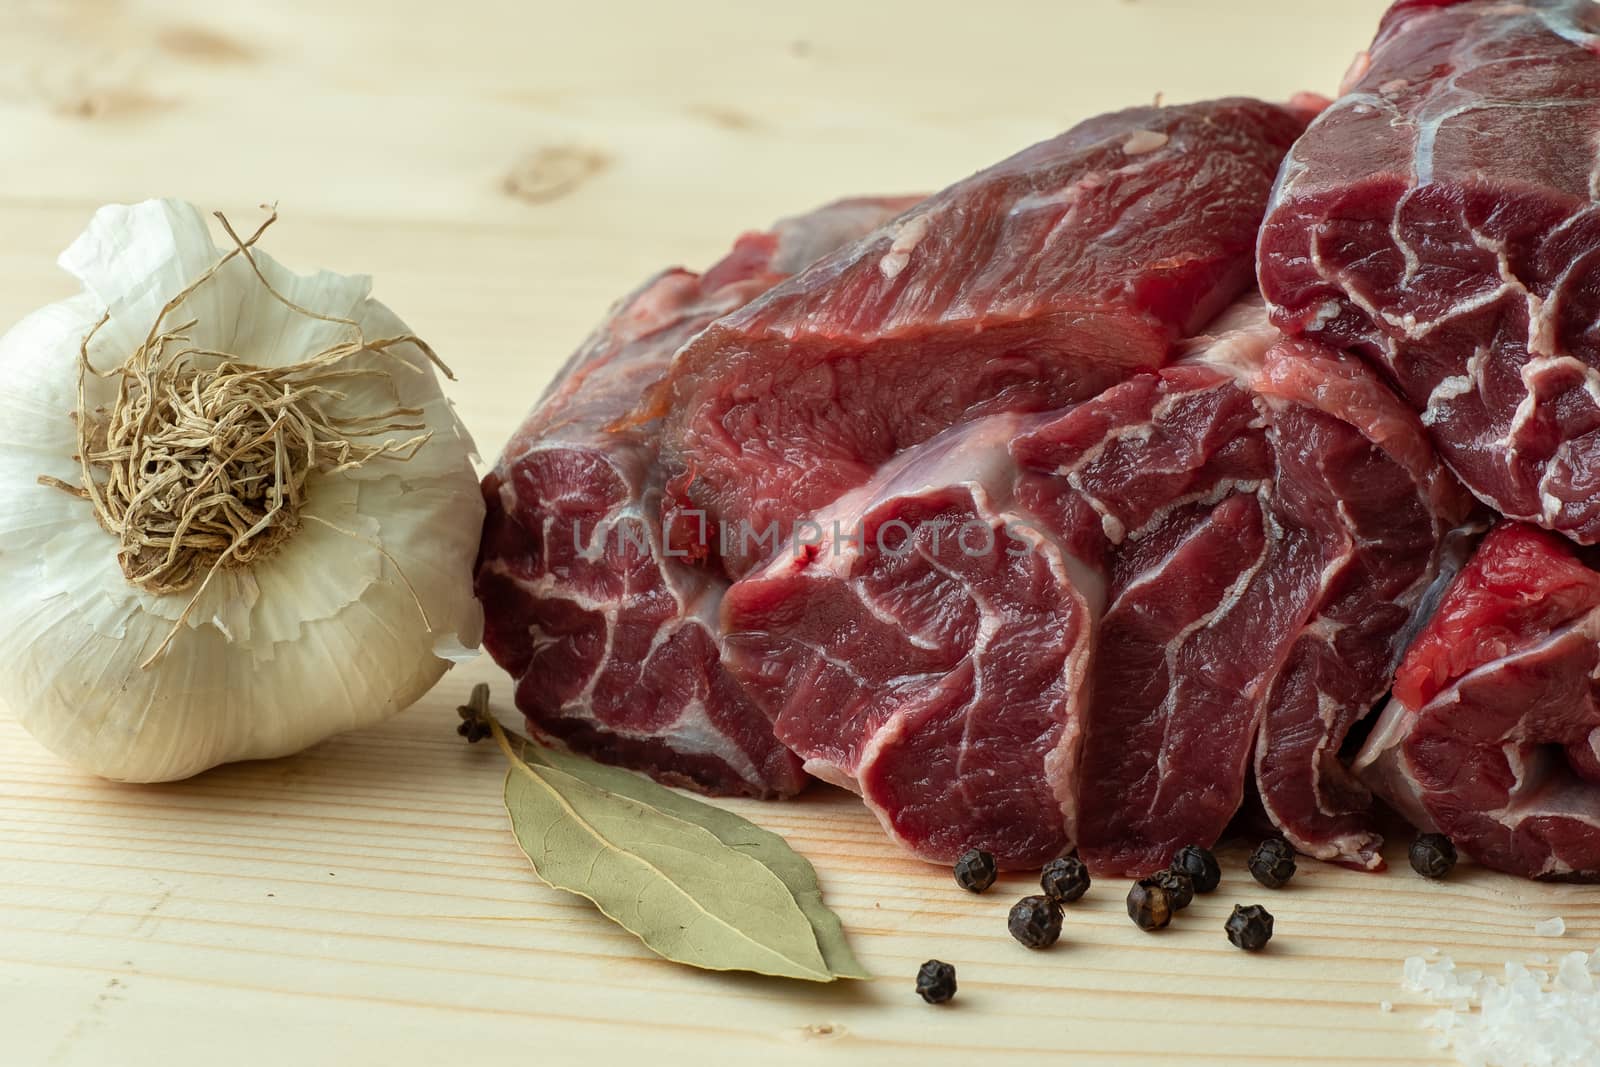 Fresh beef with ingredients for cooking on wooden board